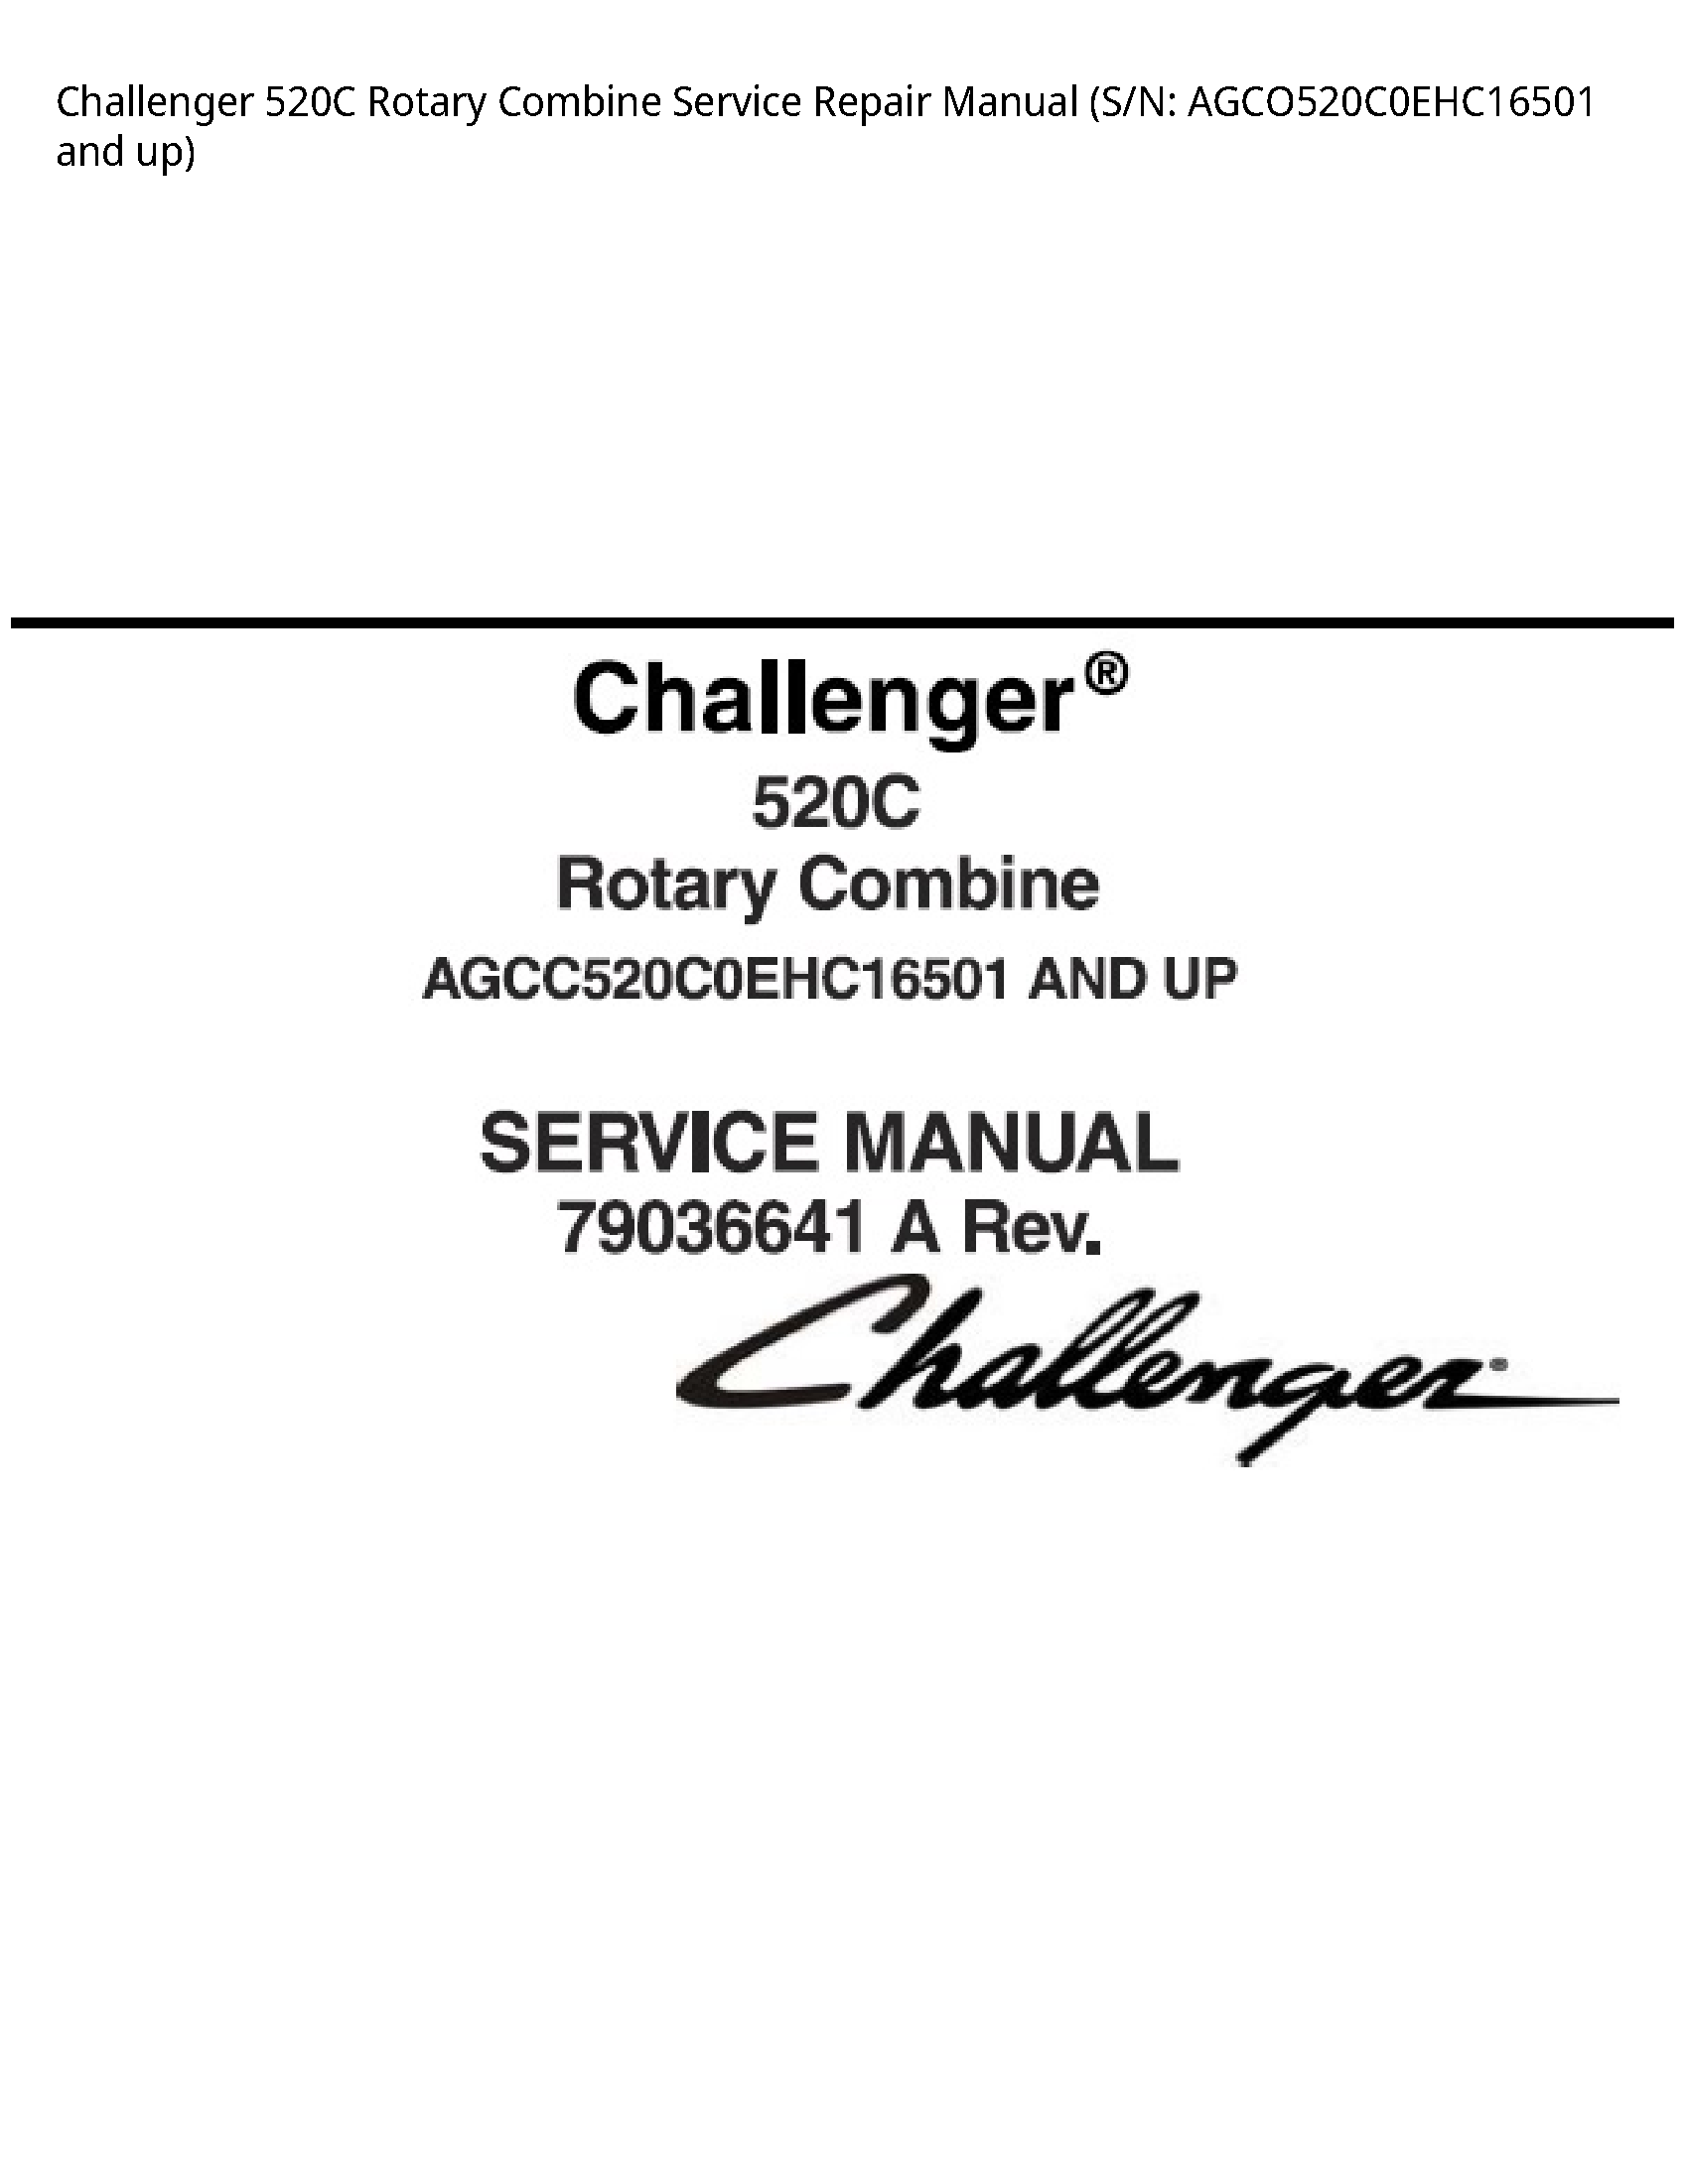 Challenger 520C Rotary Combine manual